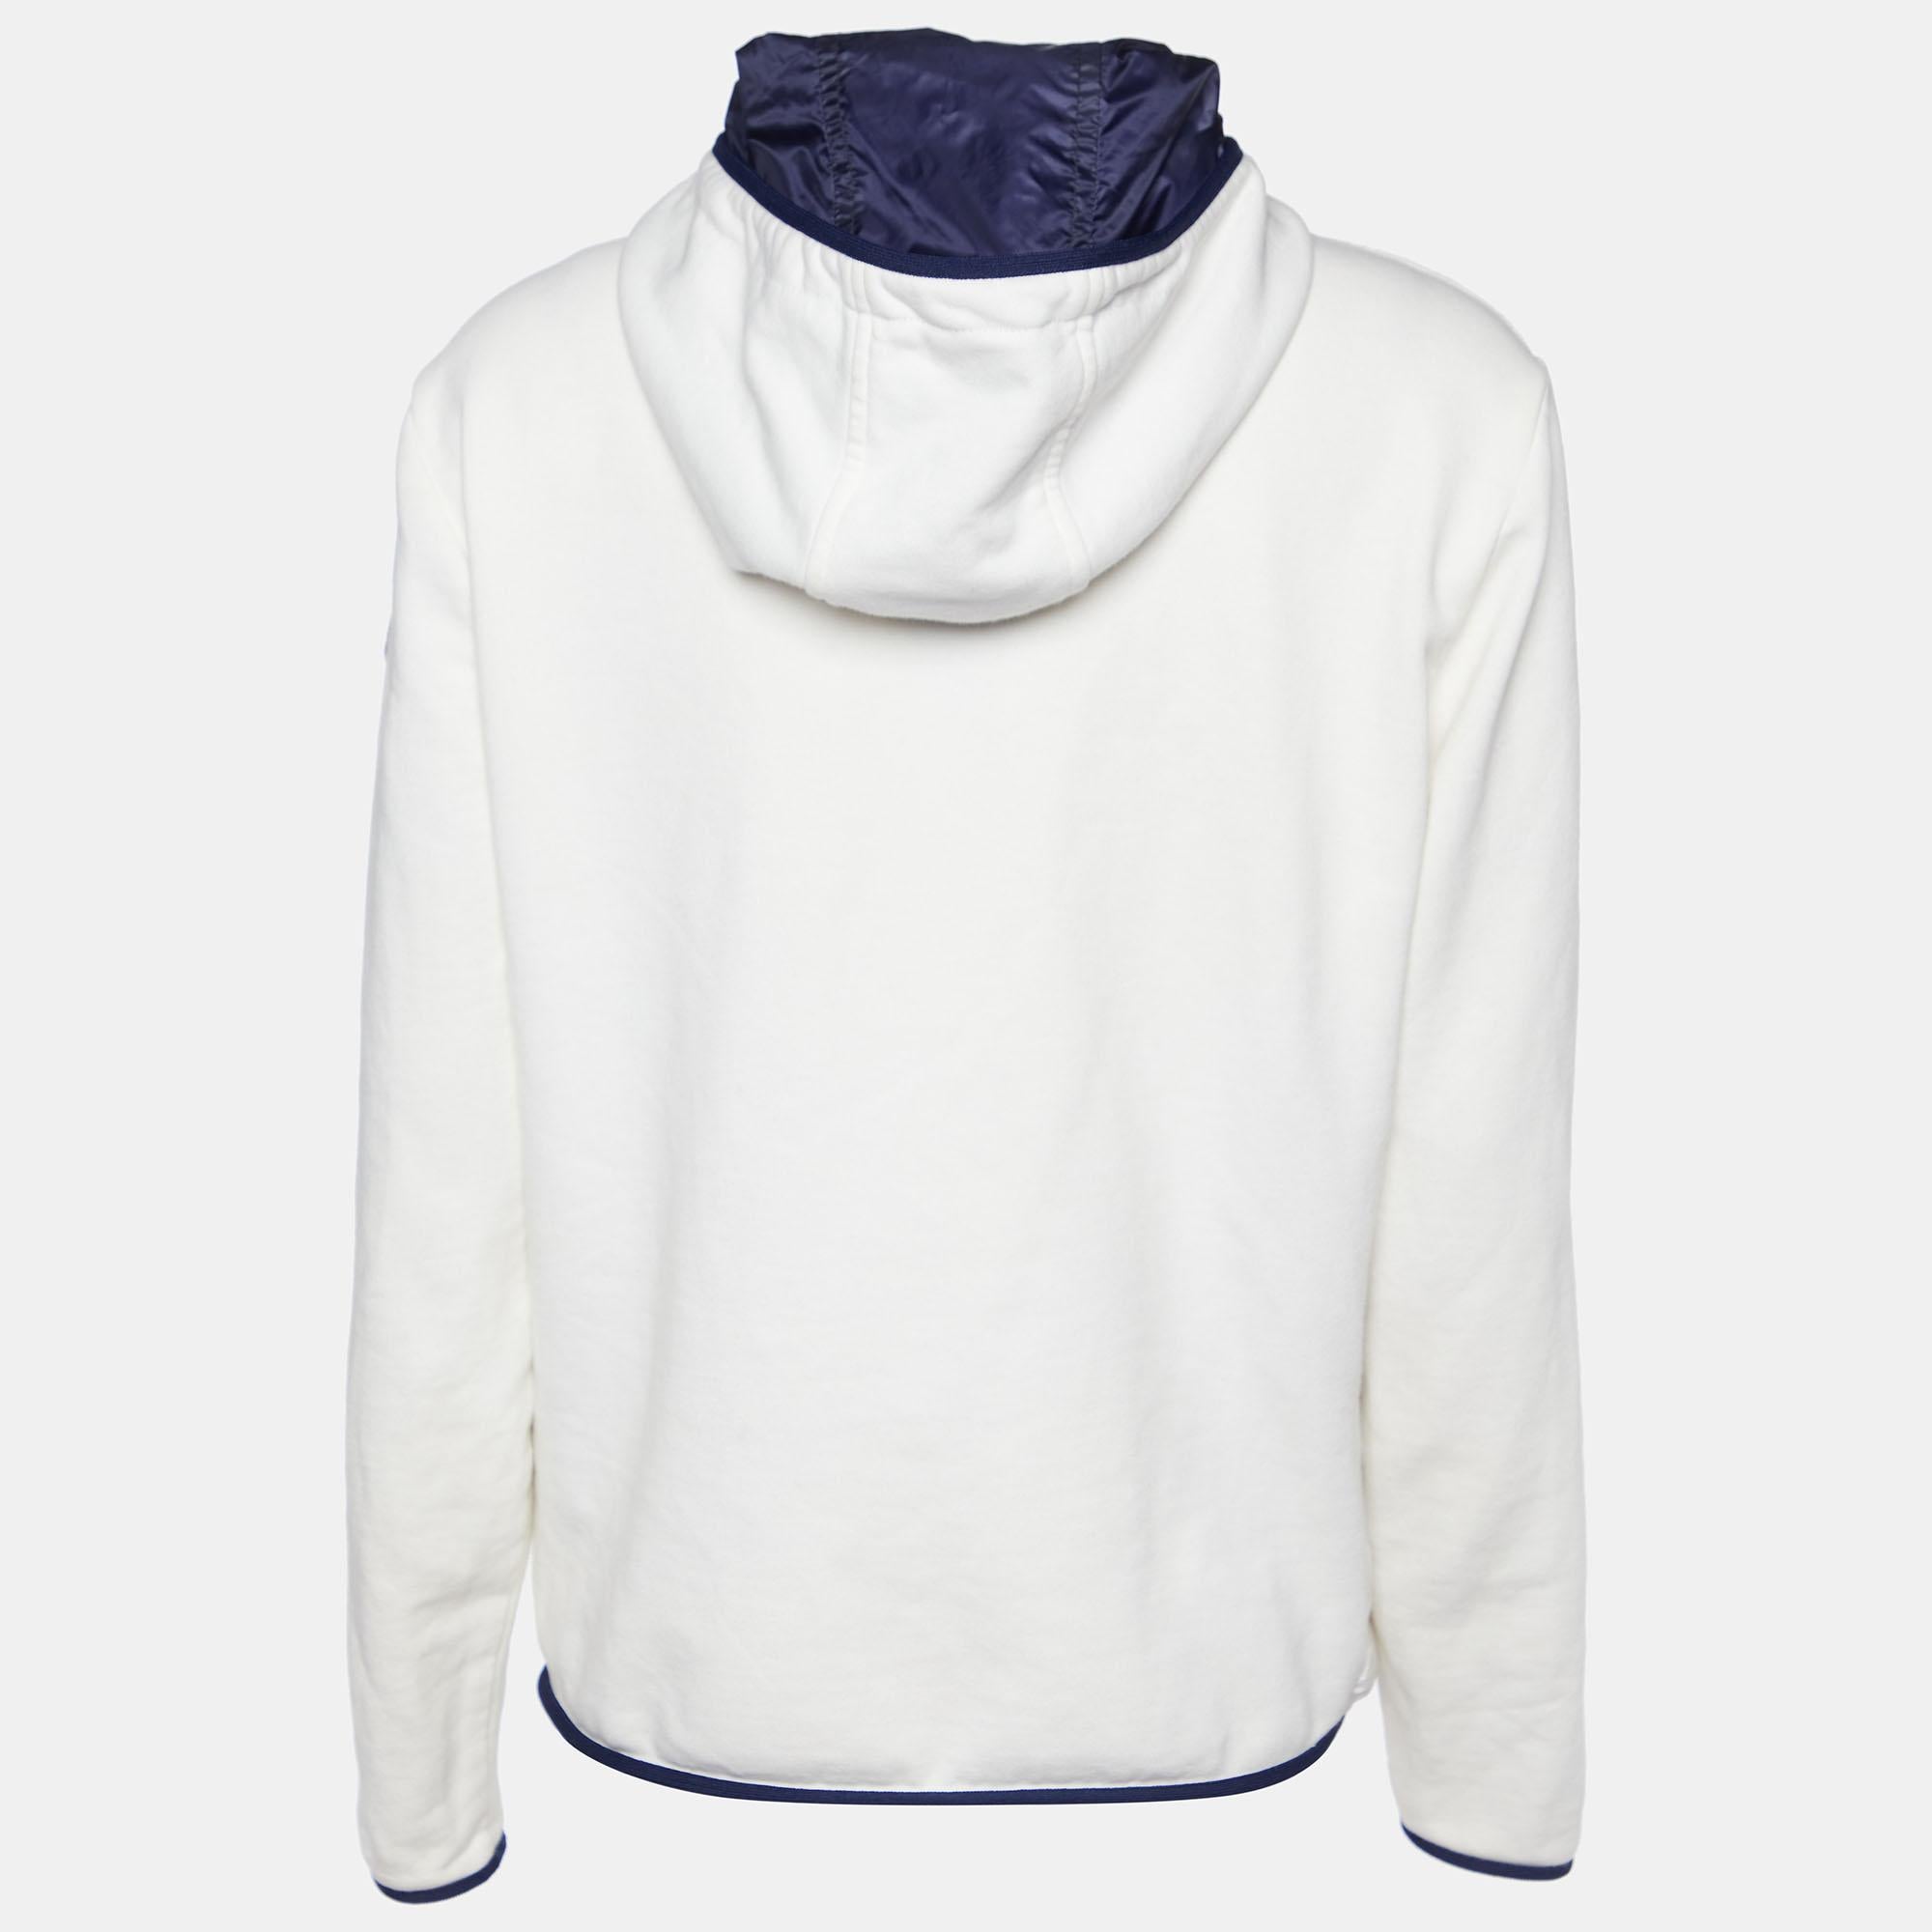 The Moncler cardigan blends luxury and comfort seamlessly. Crafted with exquisite attention to detail, it features a quilted body and knit sleeves for a stylish contrast. The cozy hood and zip-up design offer both warmth and versatility for any